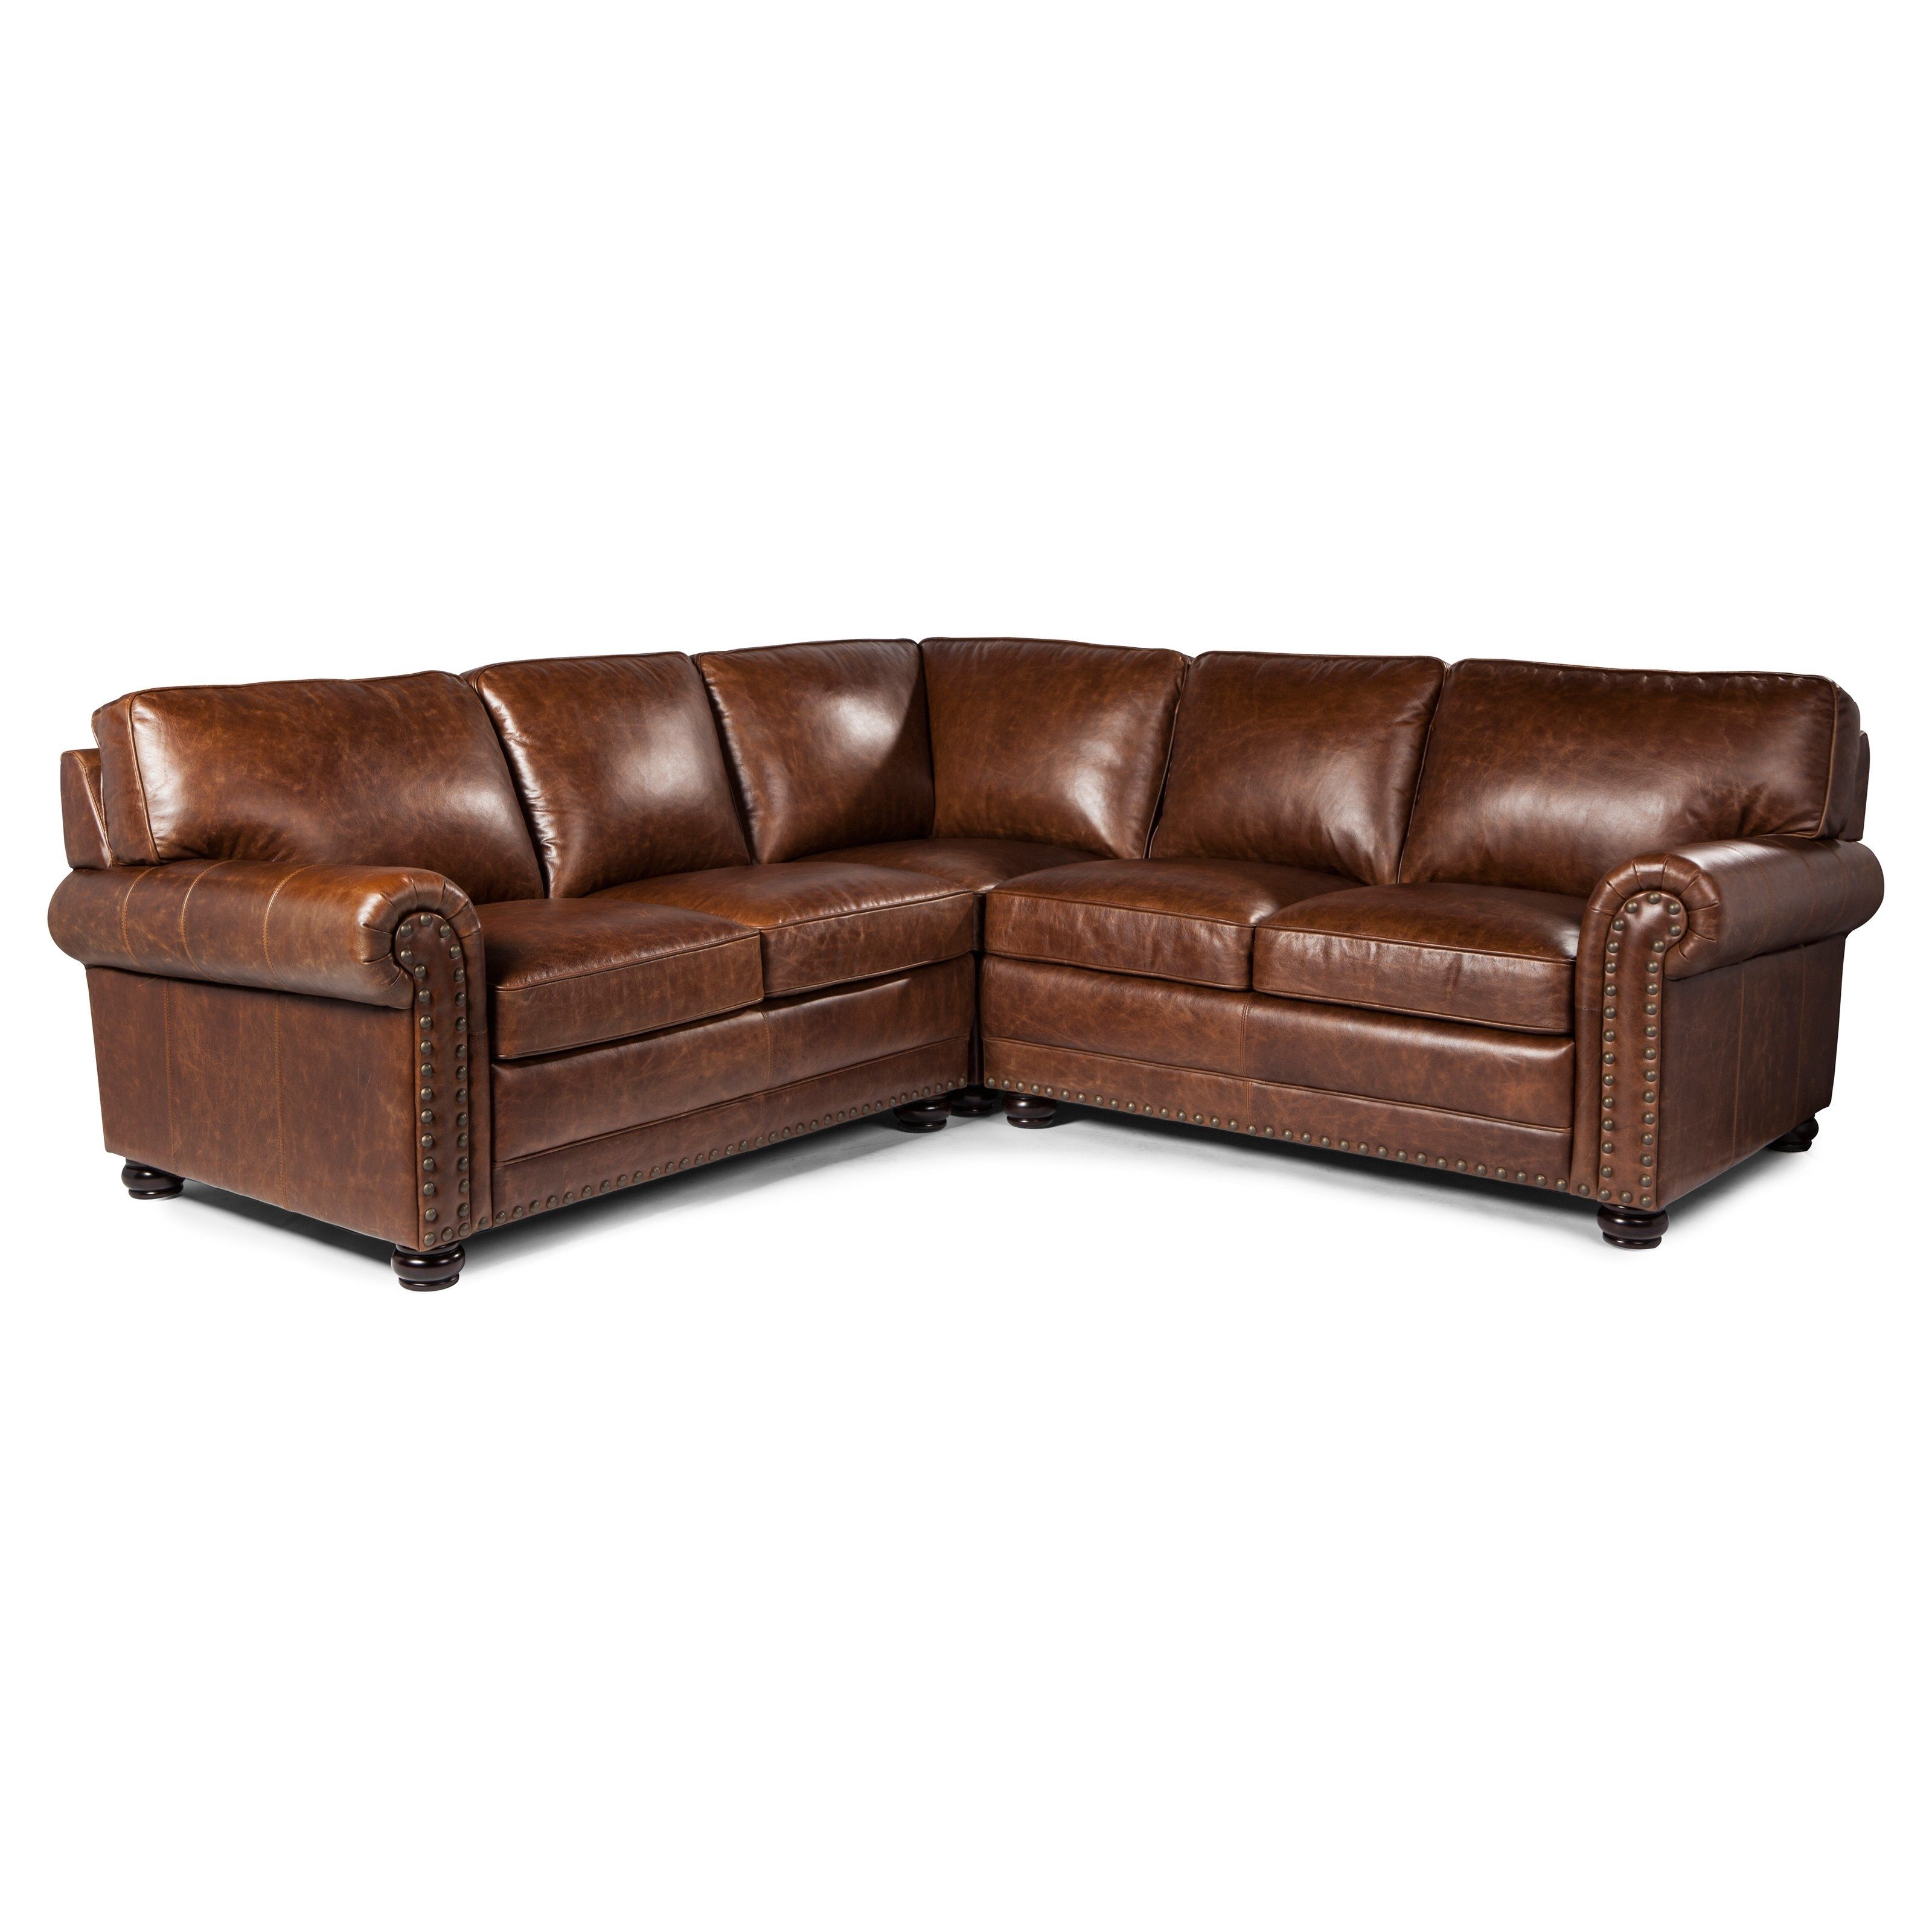 Hayneedle In Widely Used Sectional Sofas Under  (View 10 of 20)